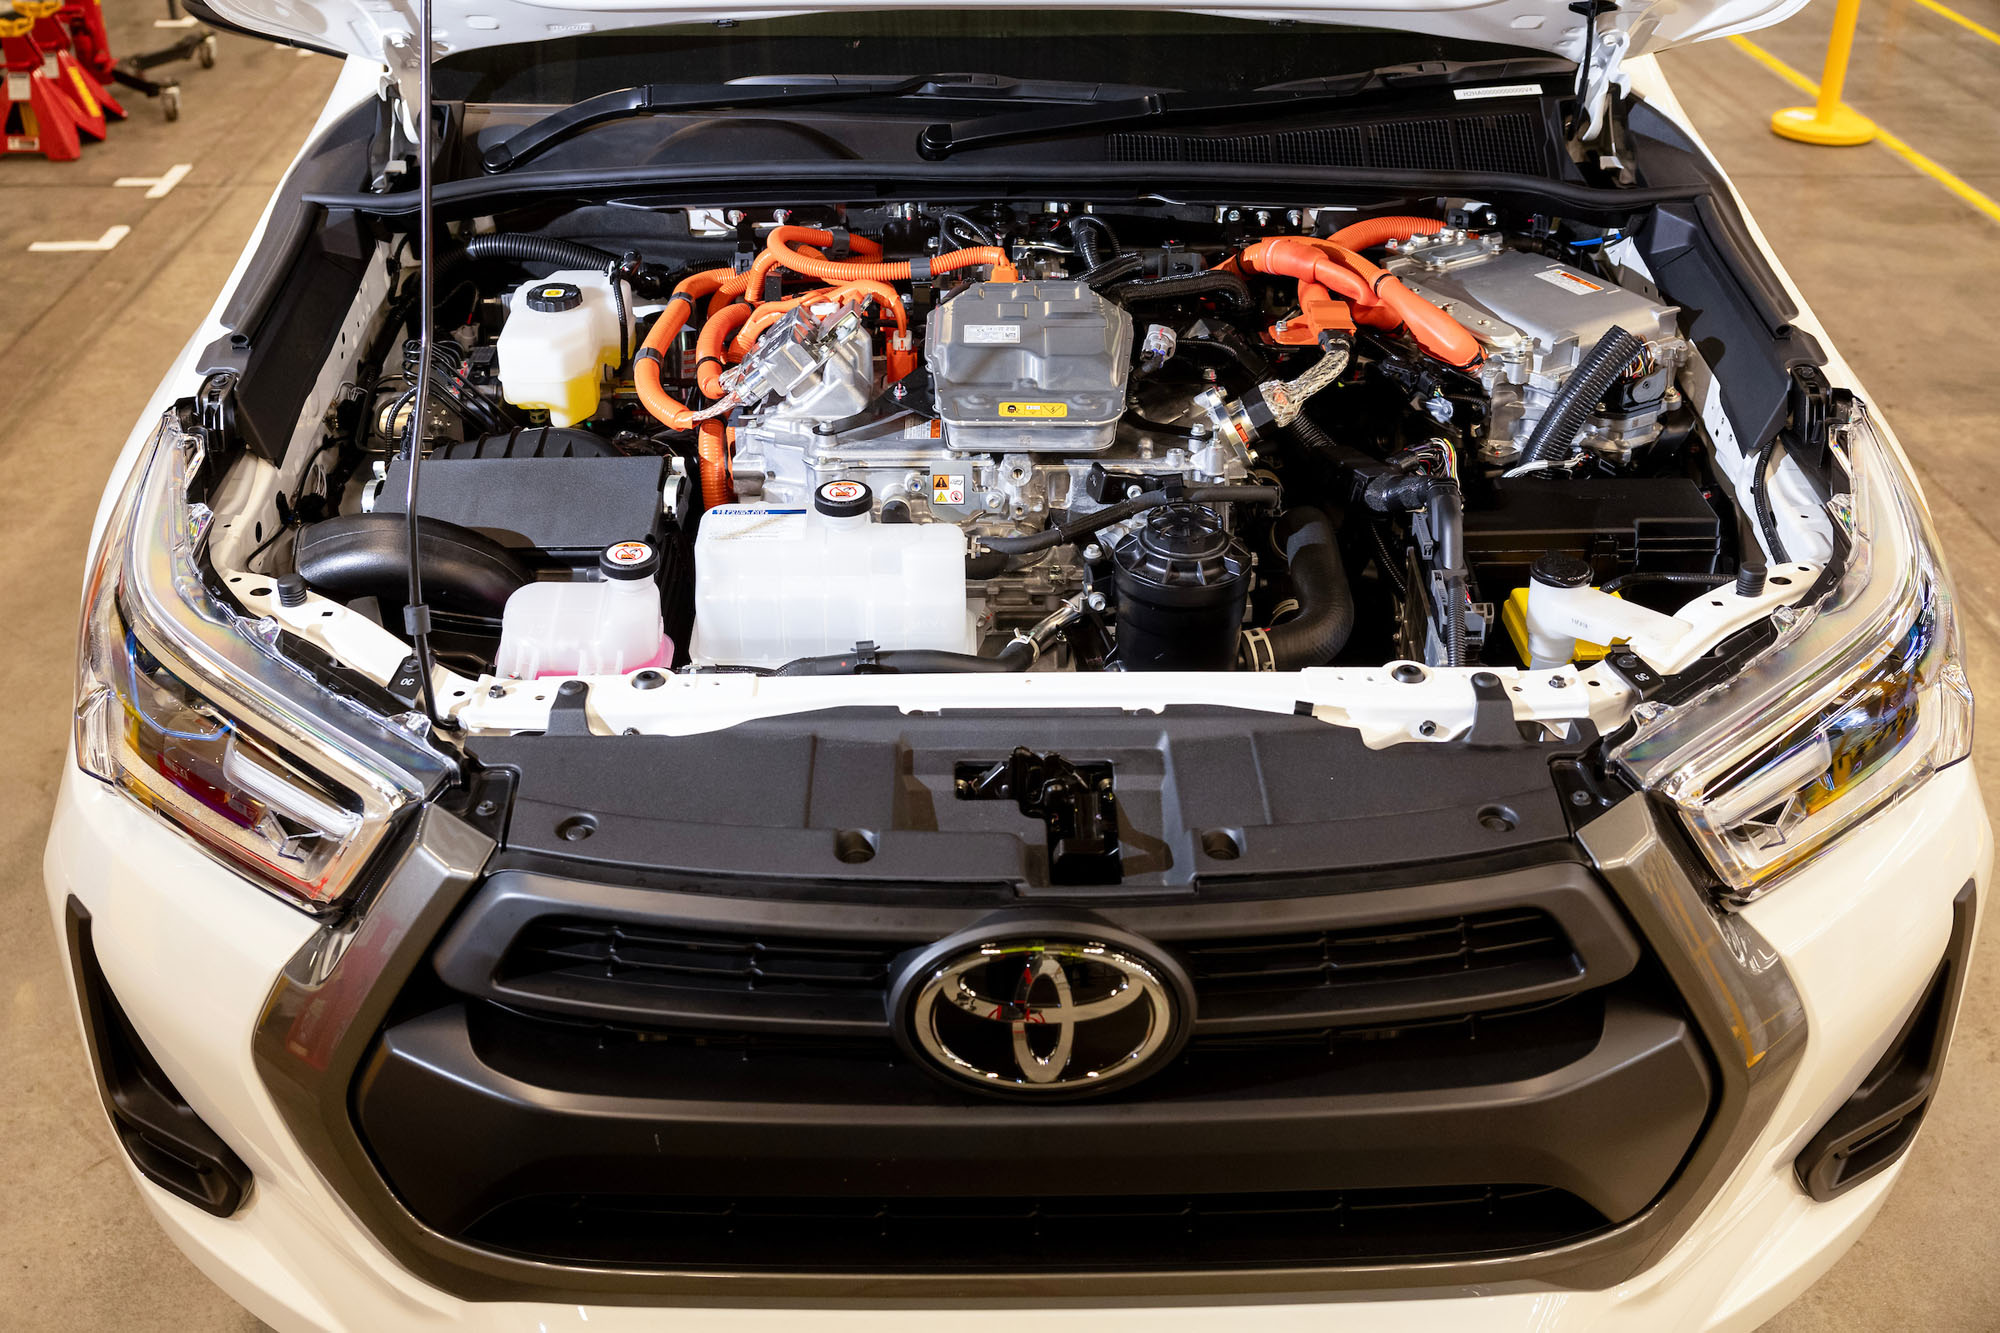 hydrogen fuel cell, toyota, toyota hilux, toyota reveals hydrogen-powered hilux